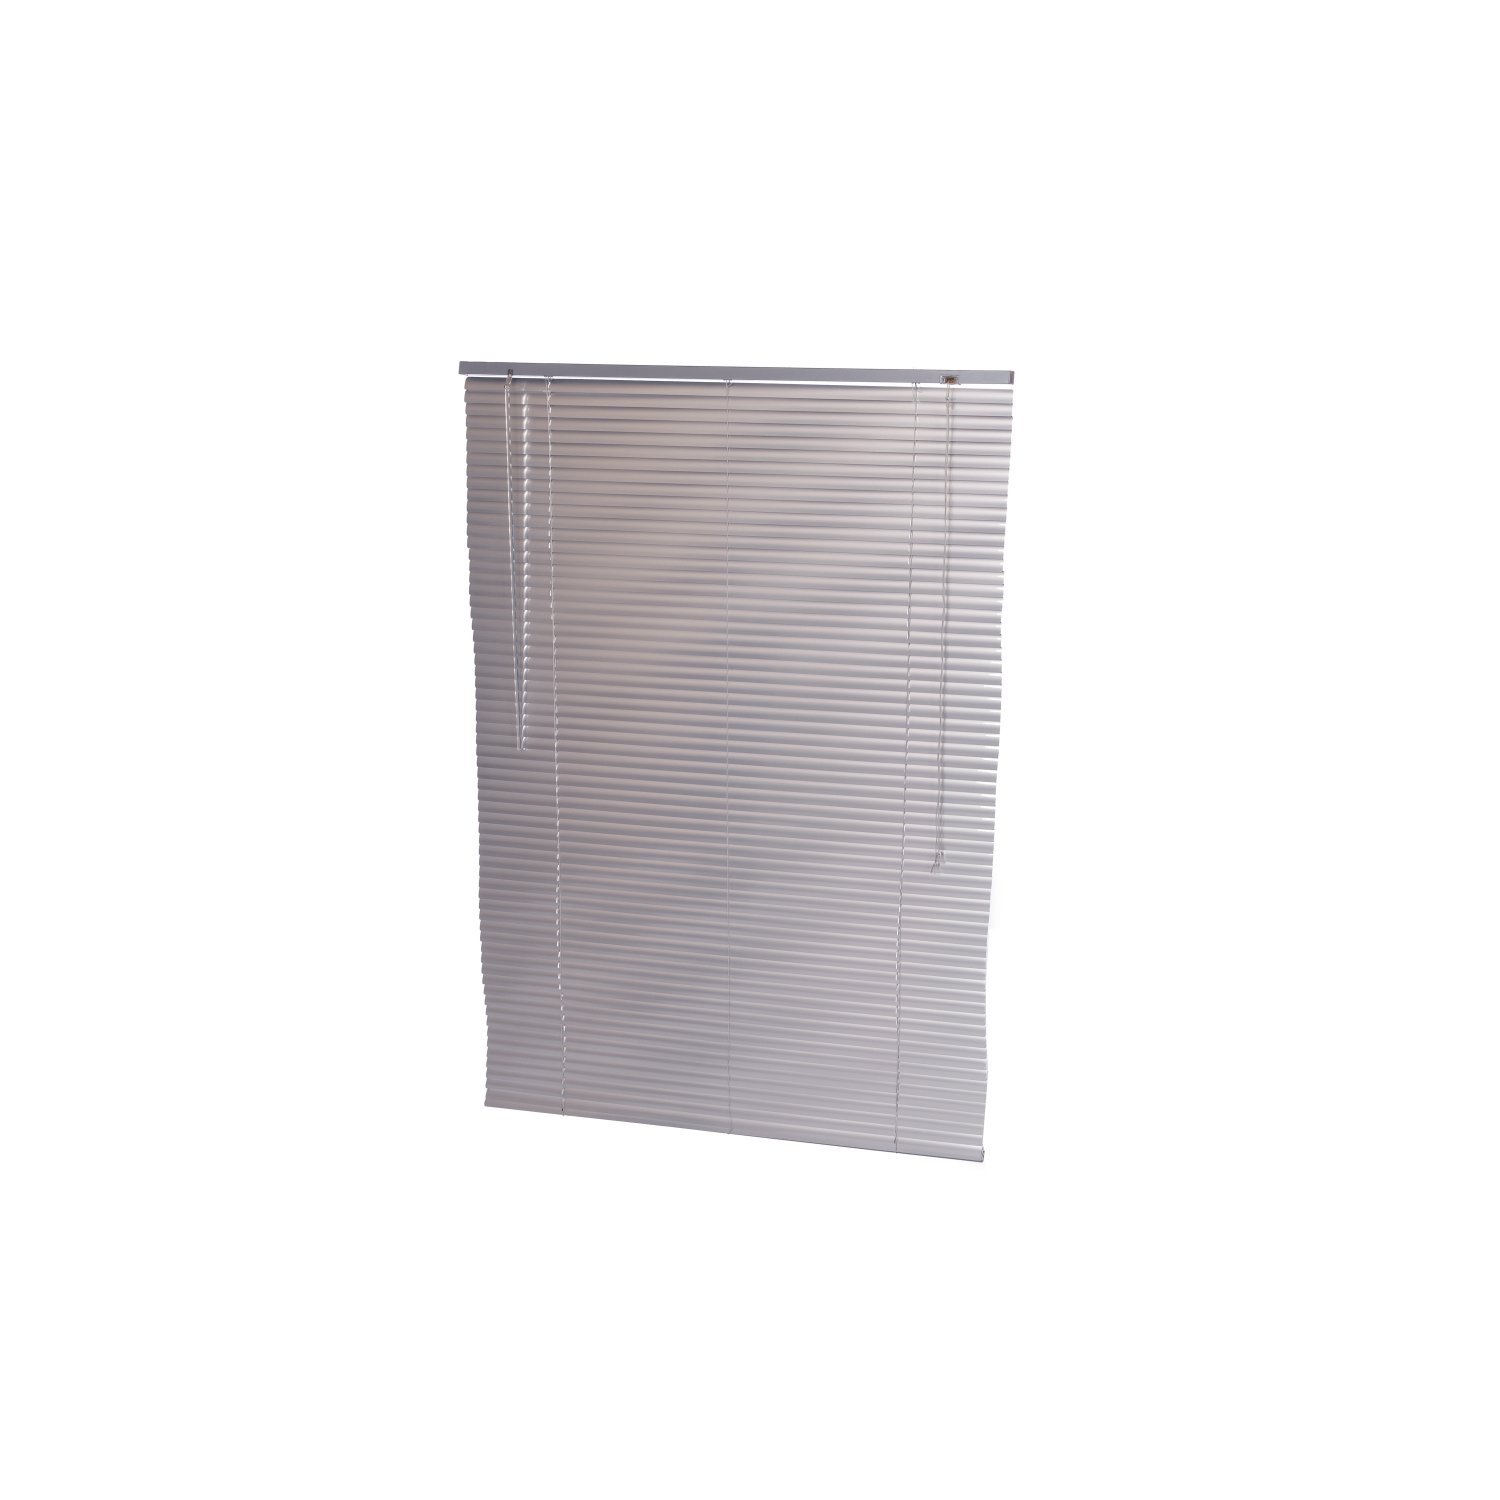 100 x 150cm Aluminium Silver Home Office Venetian Window Blinds with Fixings